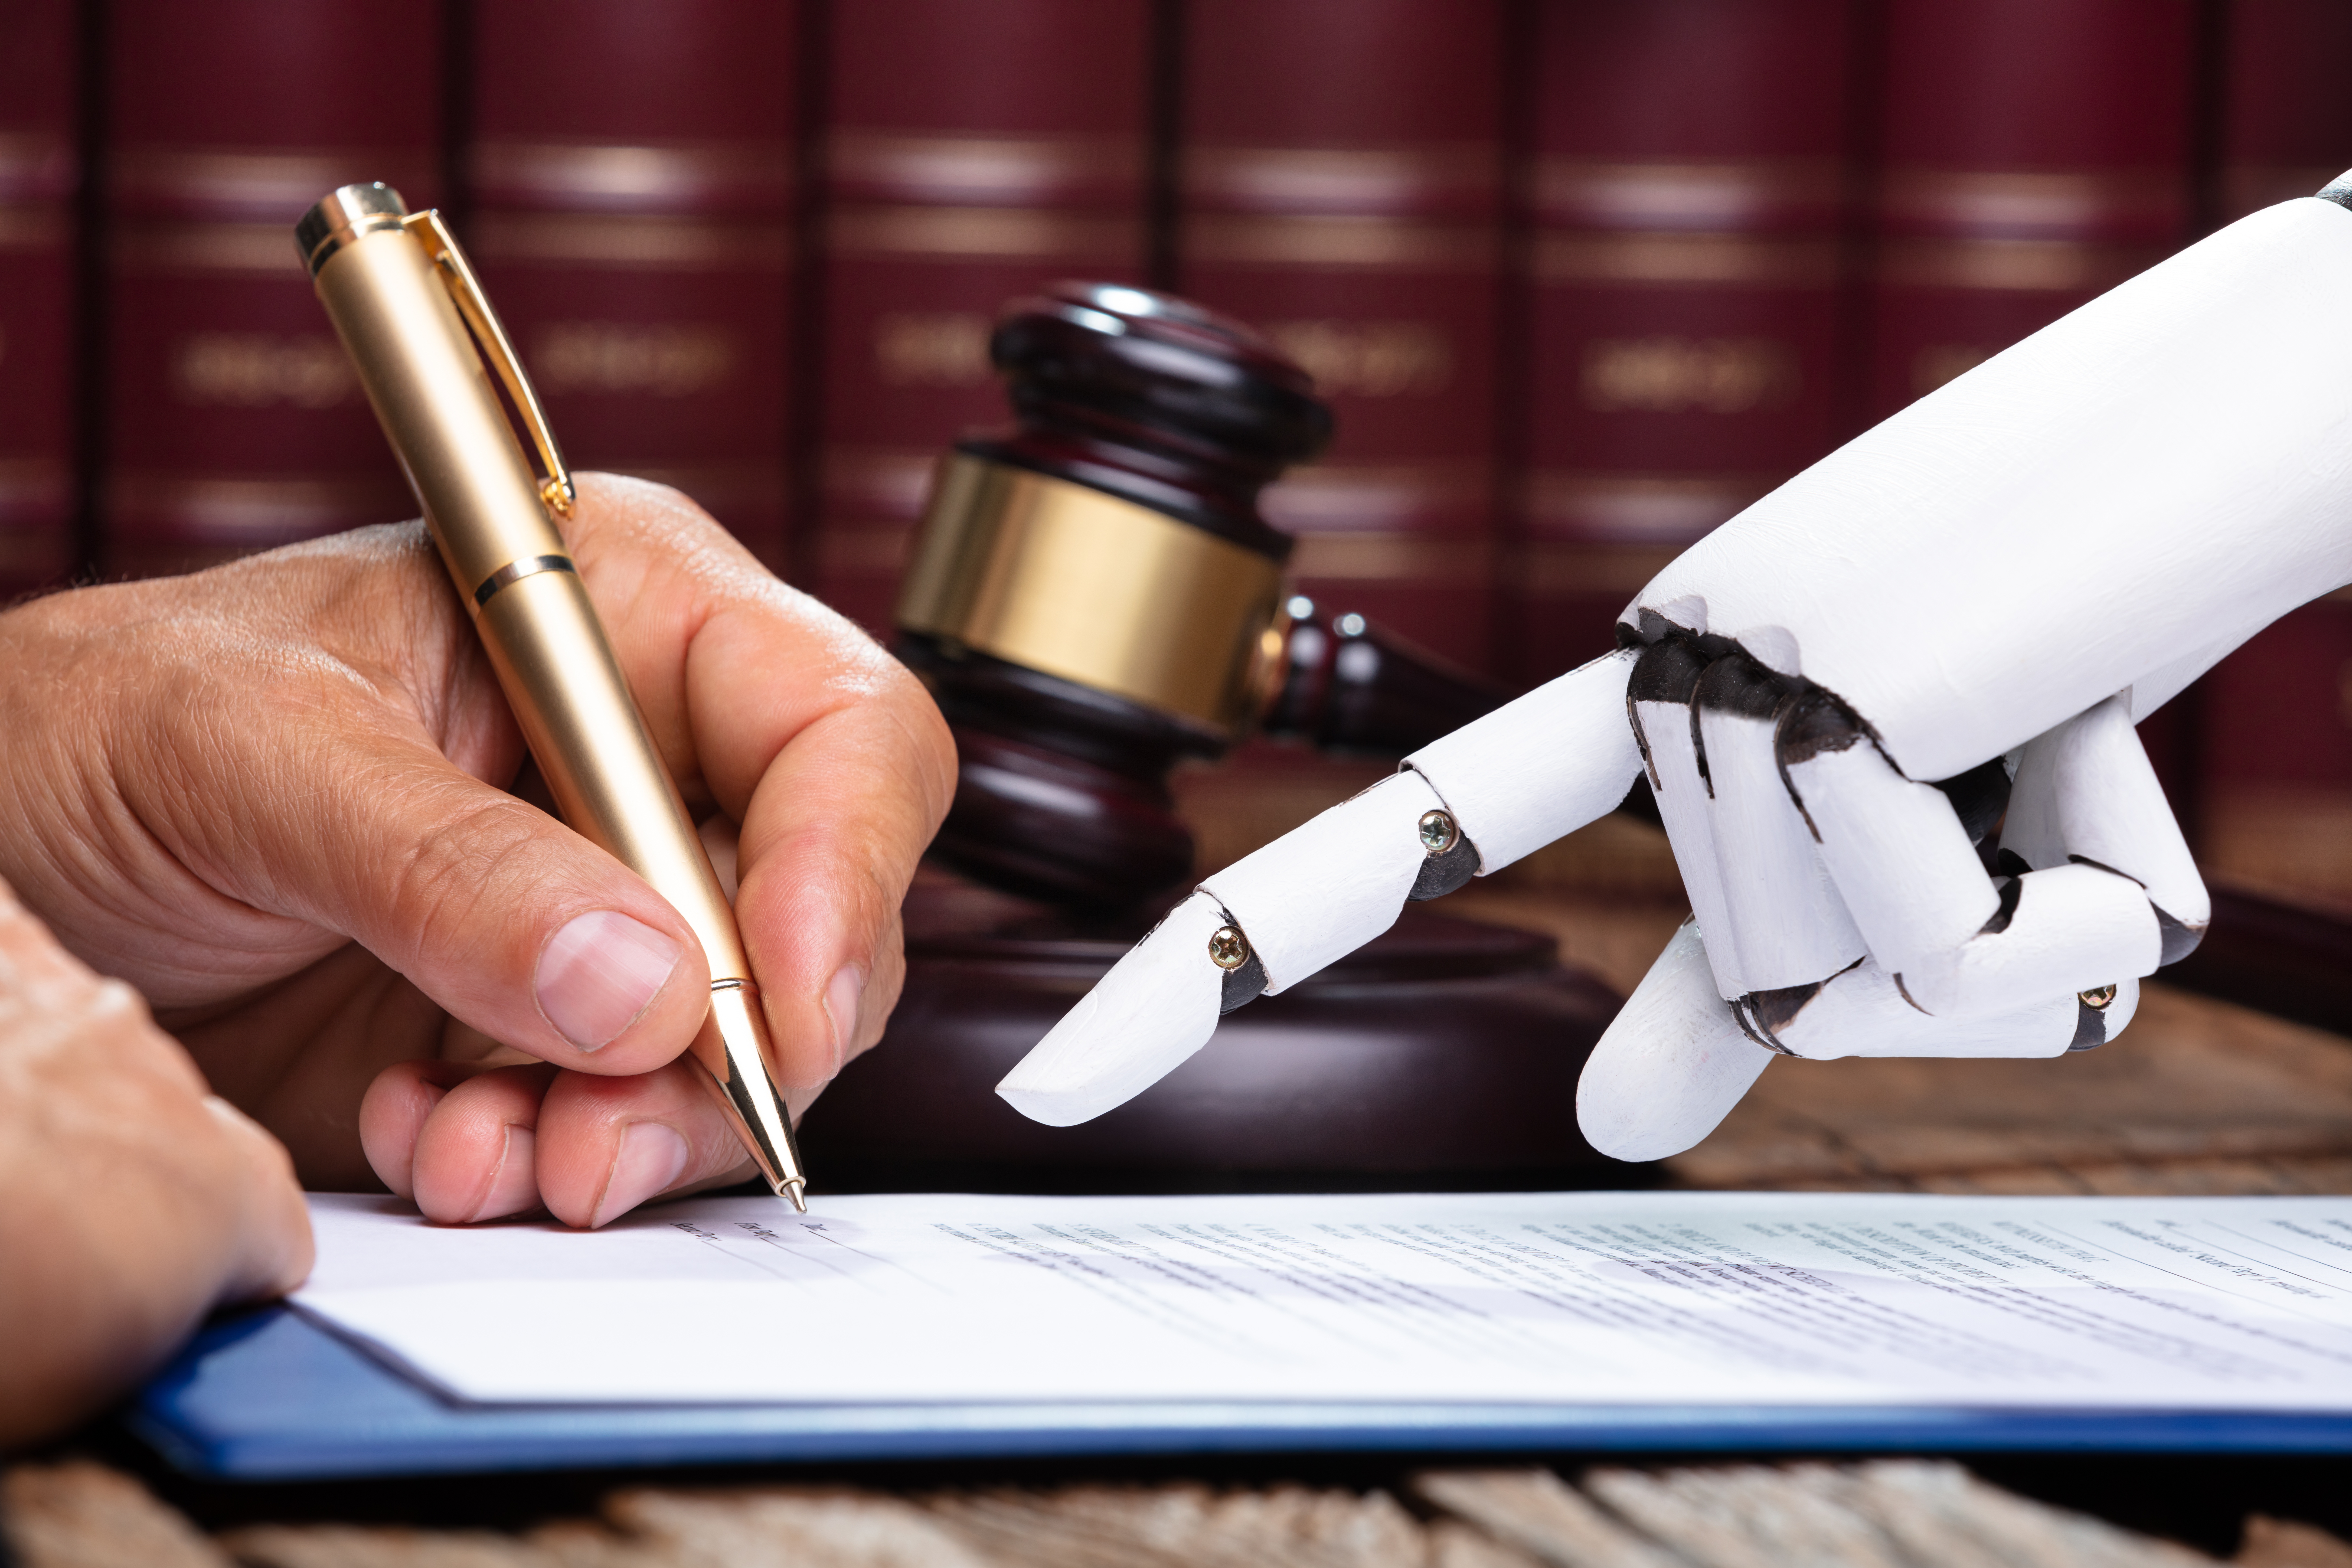 A robot hand helps a human hand sign a law document.